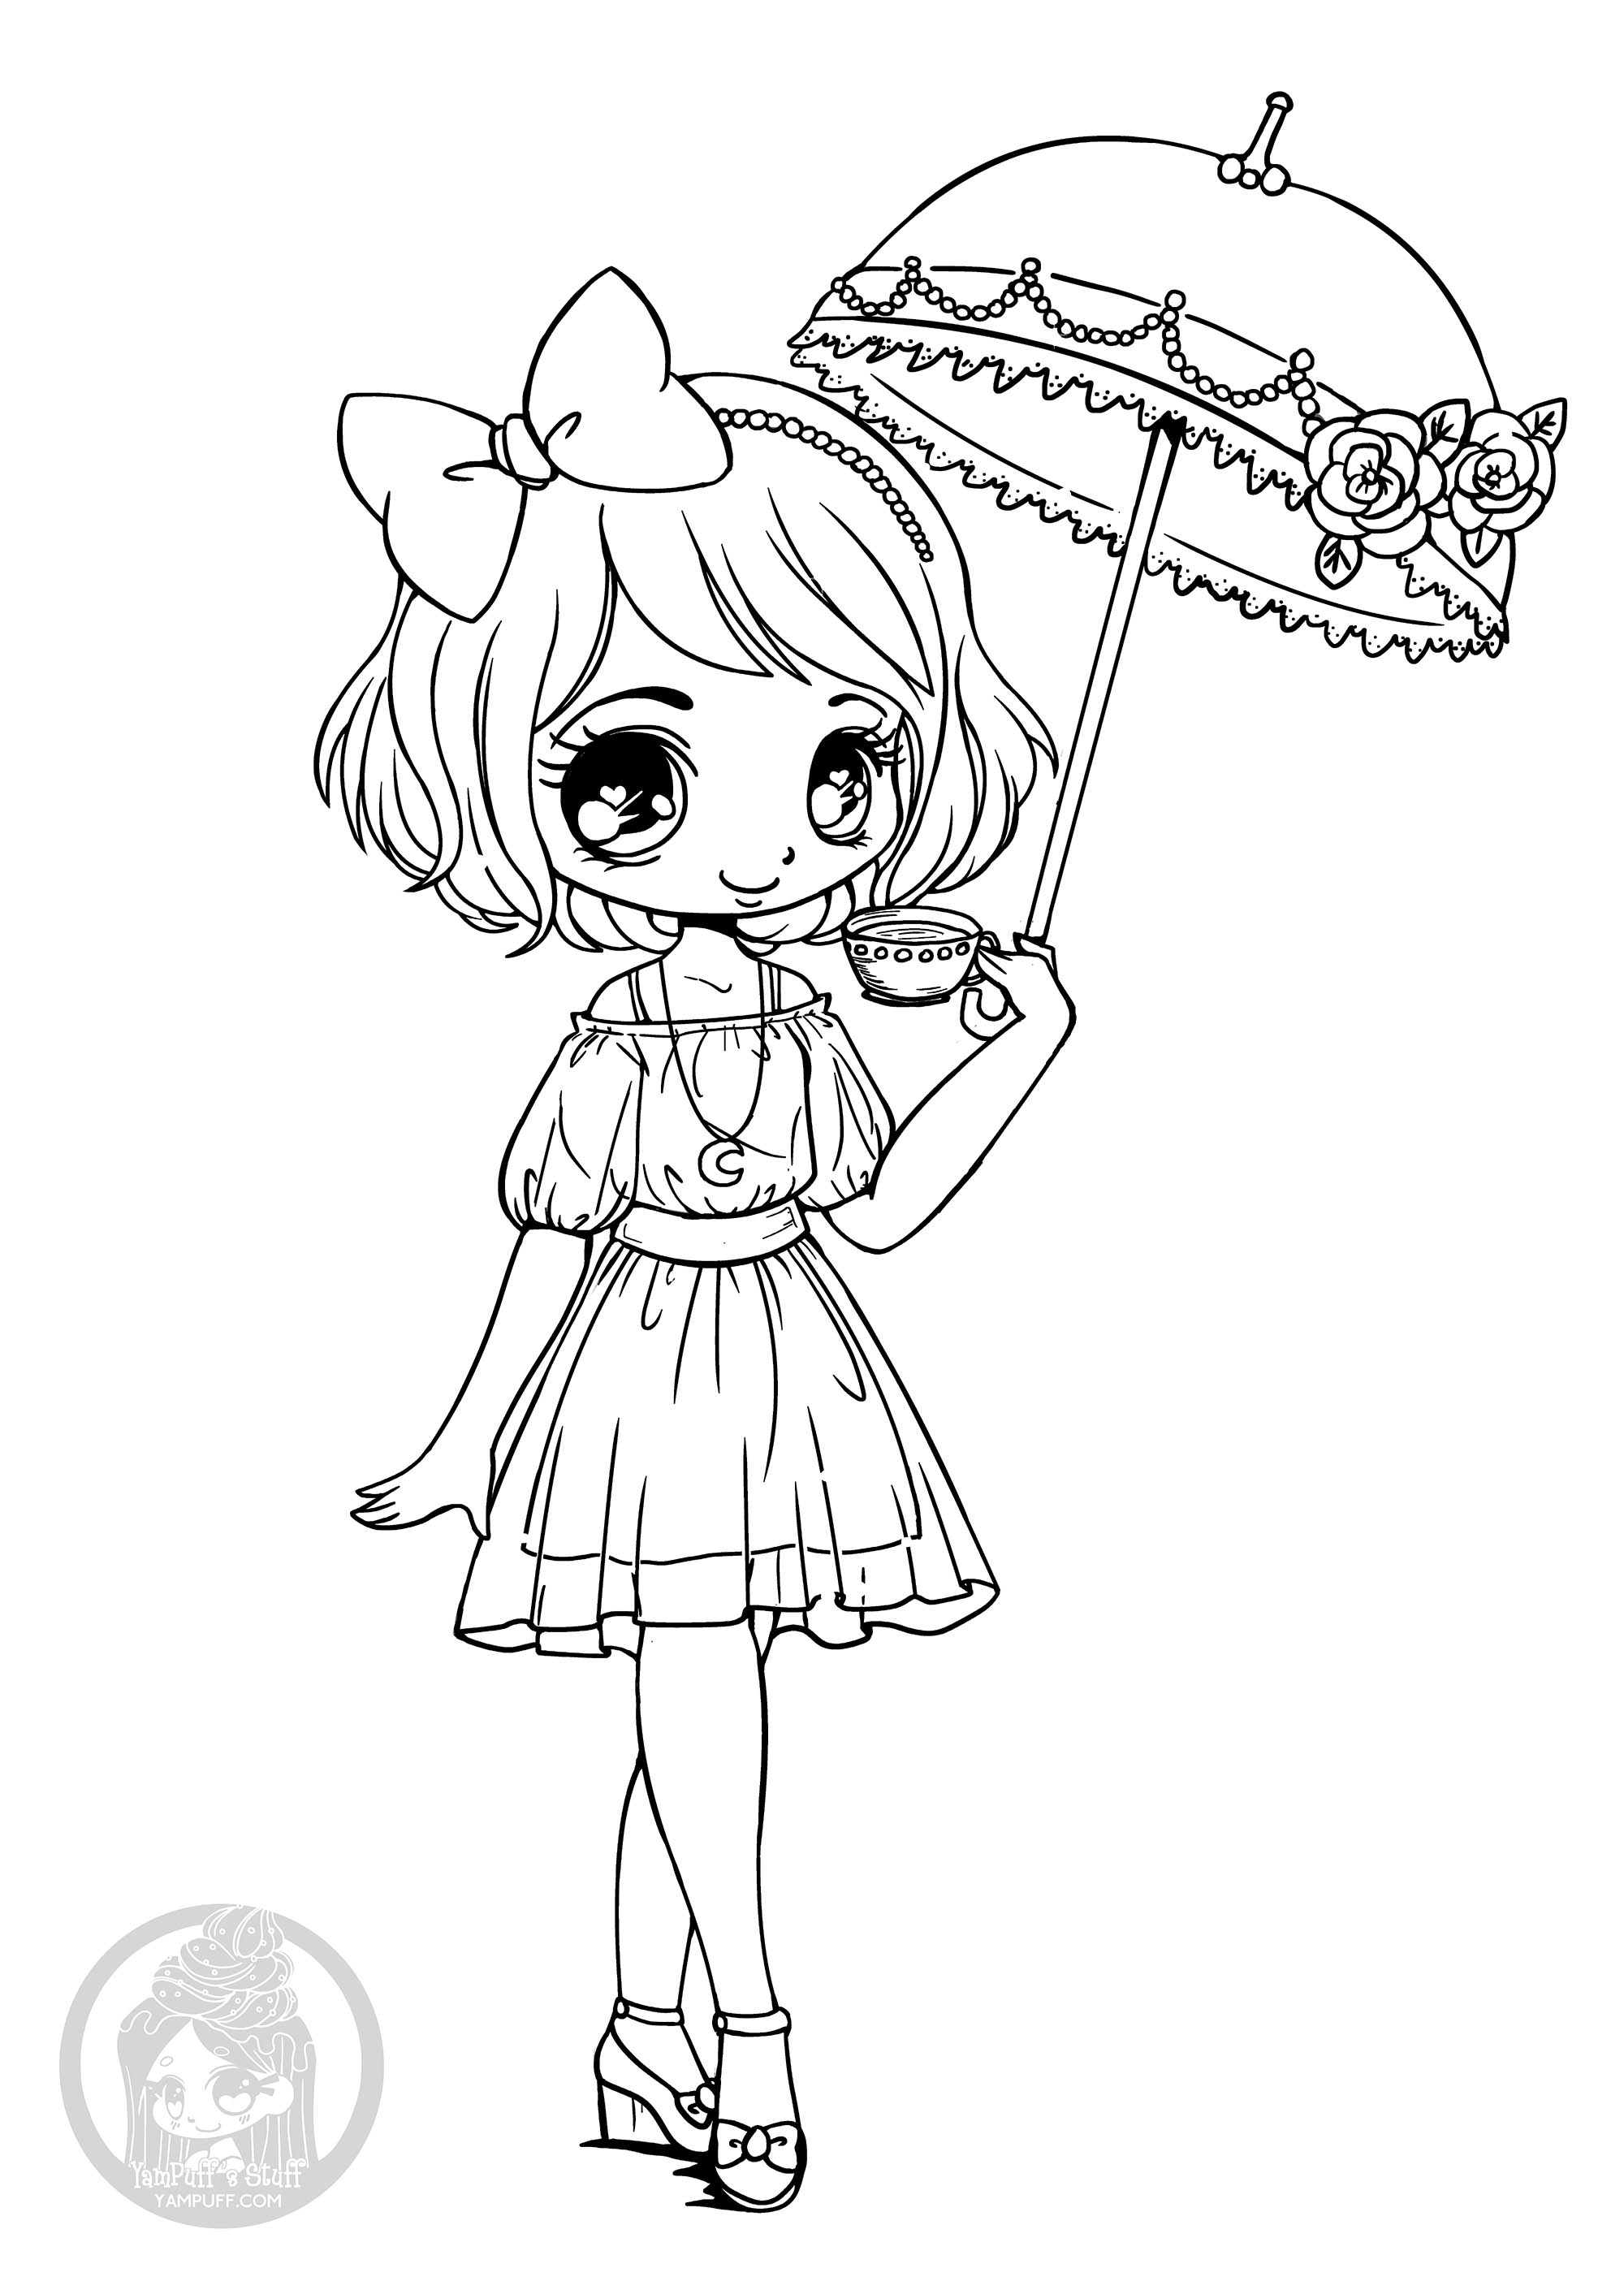 Kawaii to download for free   Kawaii Kids Coloring Pages